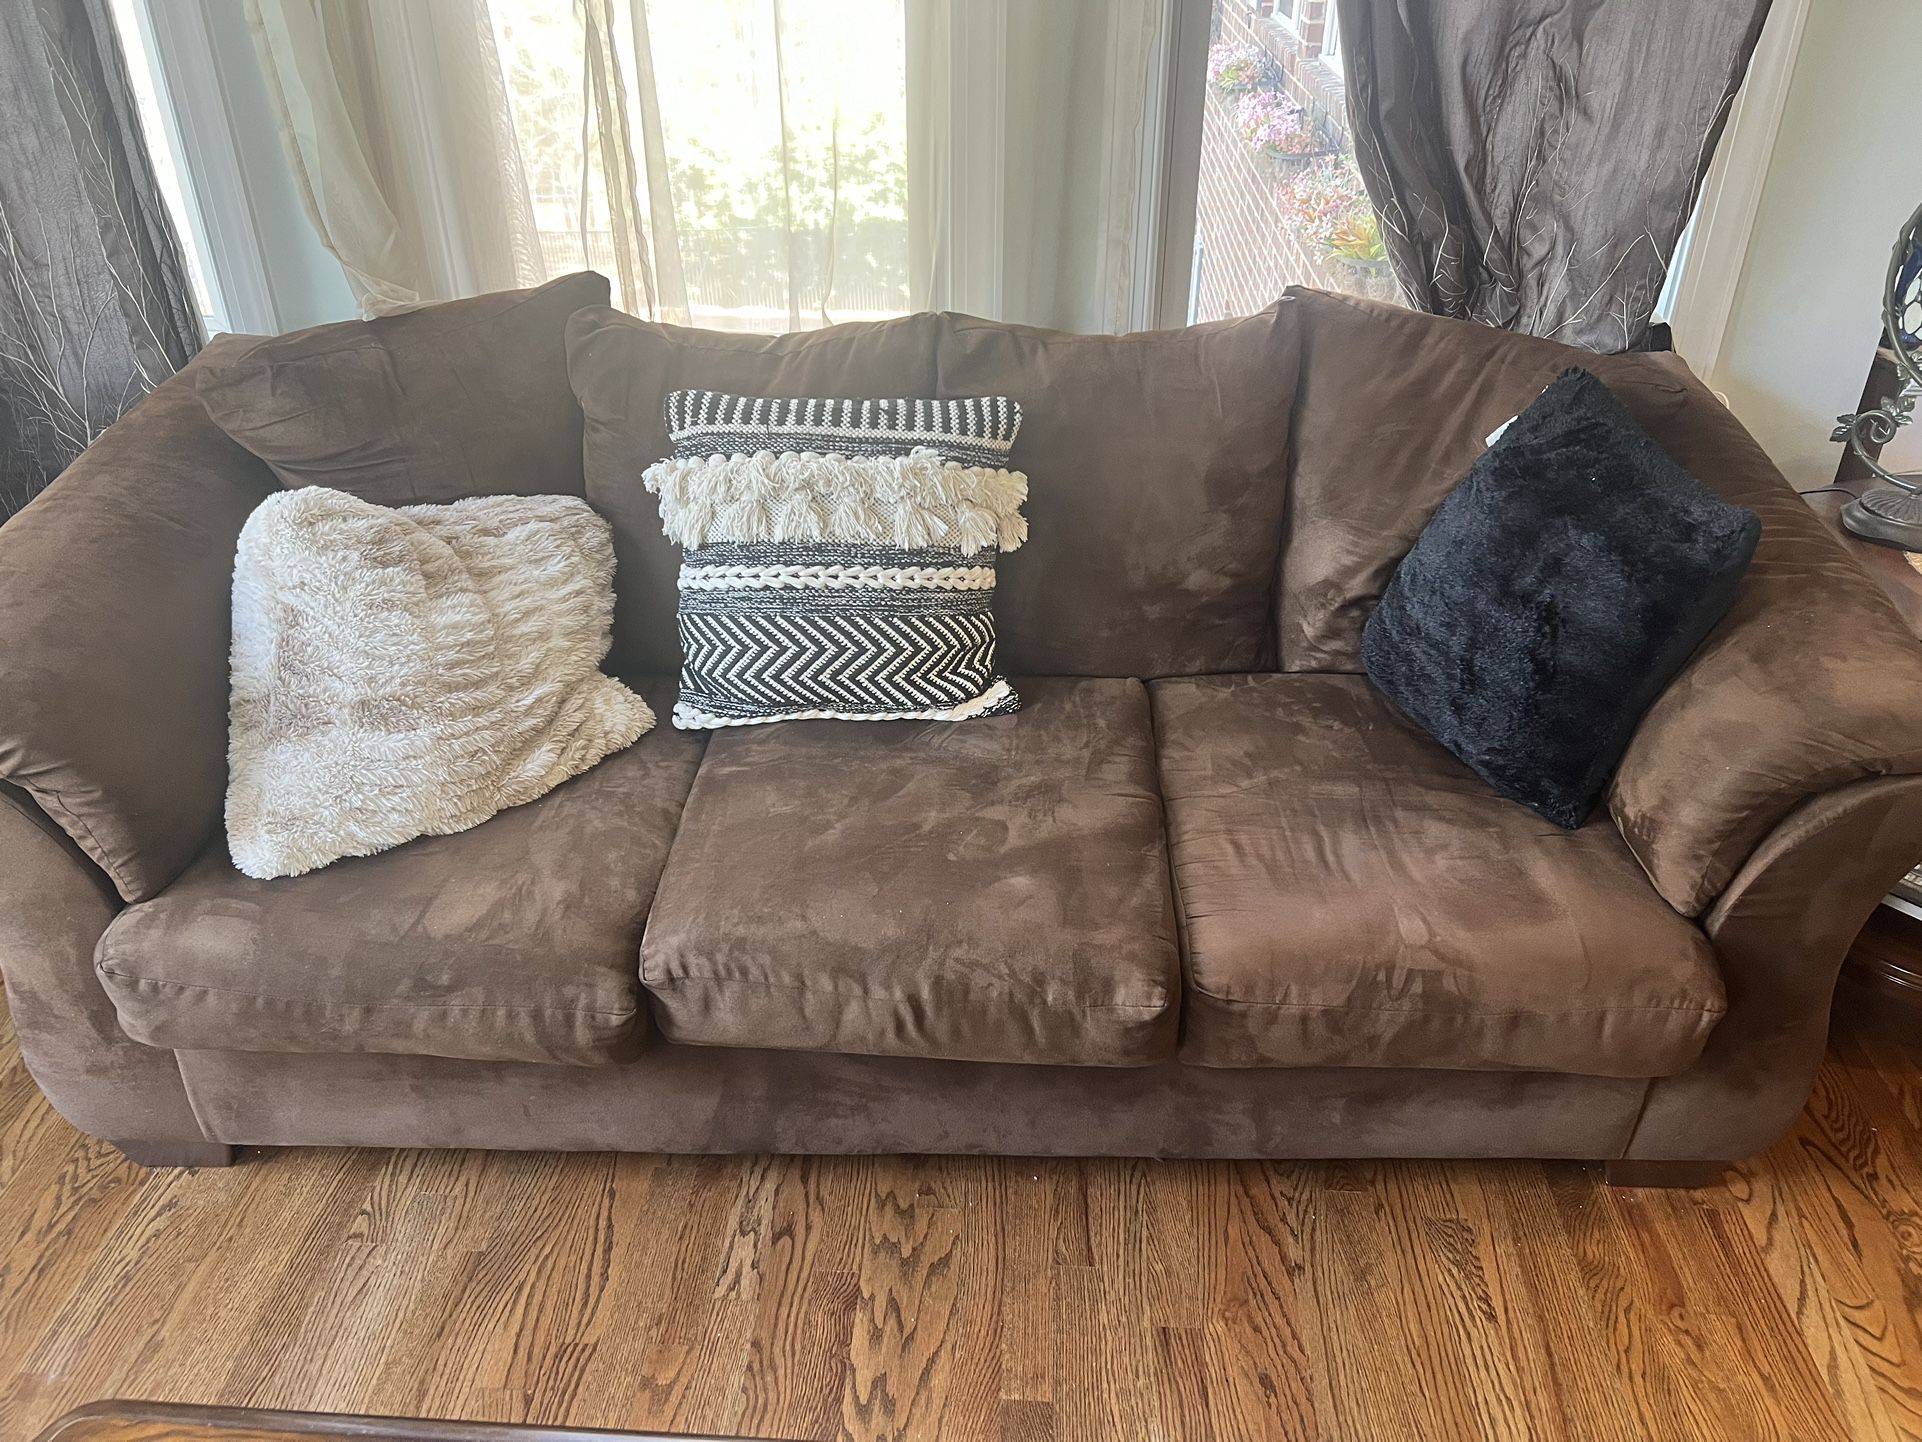 Couch And Chair $100